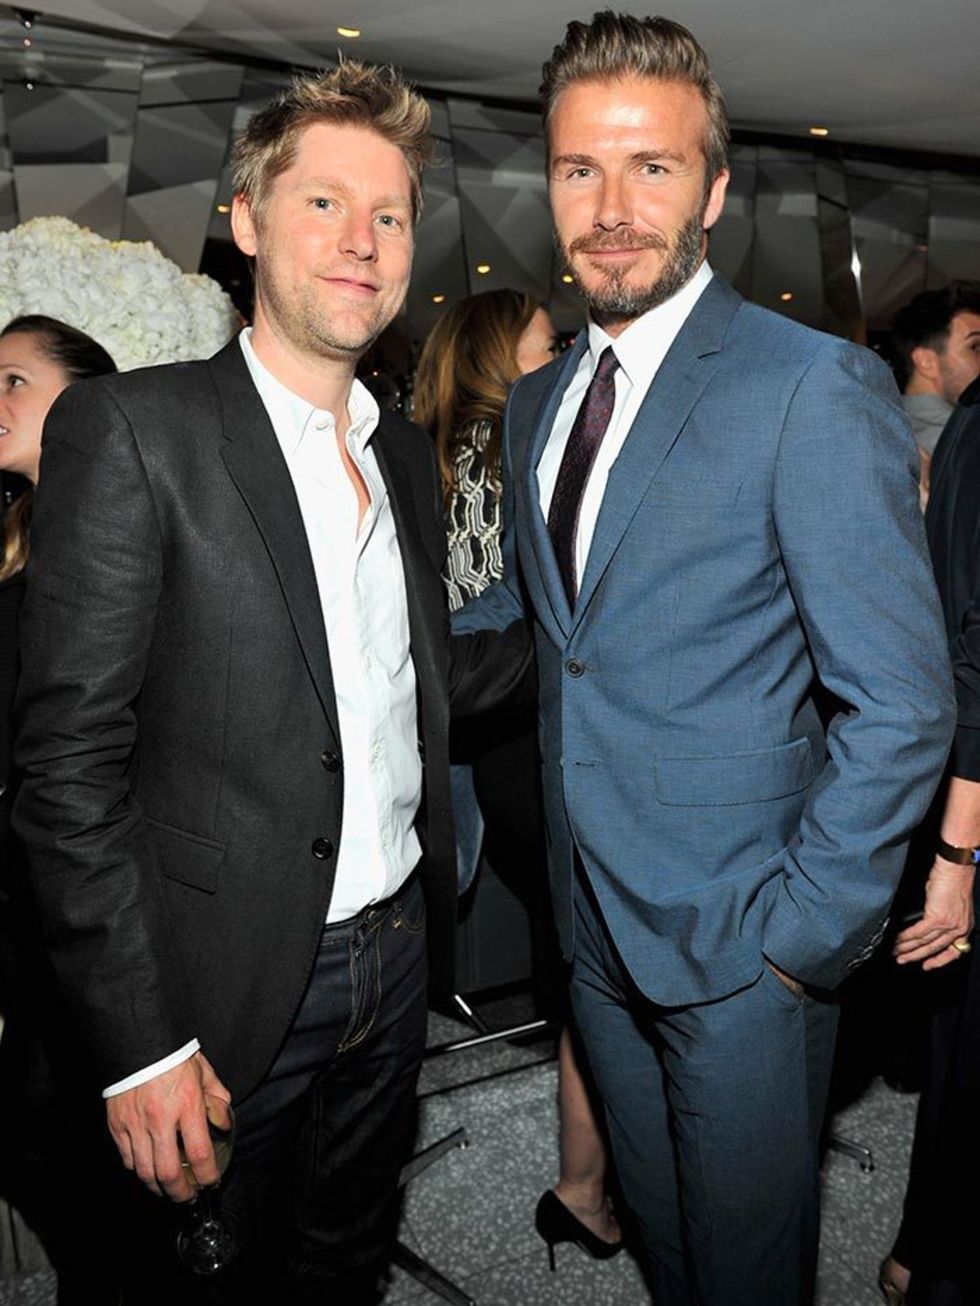 Christopher Bailey and David Beckham attend a dinner to celebrate the arrival of Victoria Beckham's Collection to Barneys in New York, April 2015.